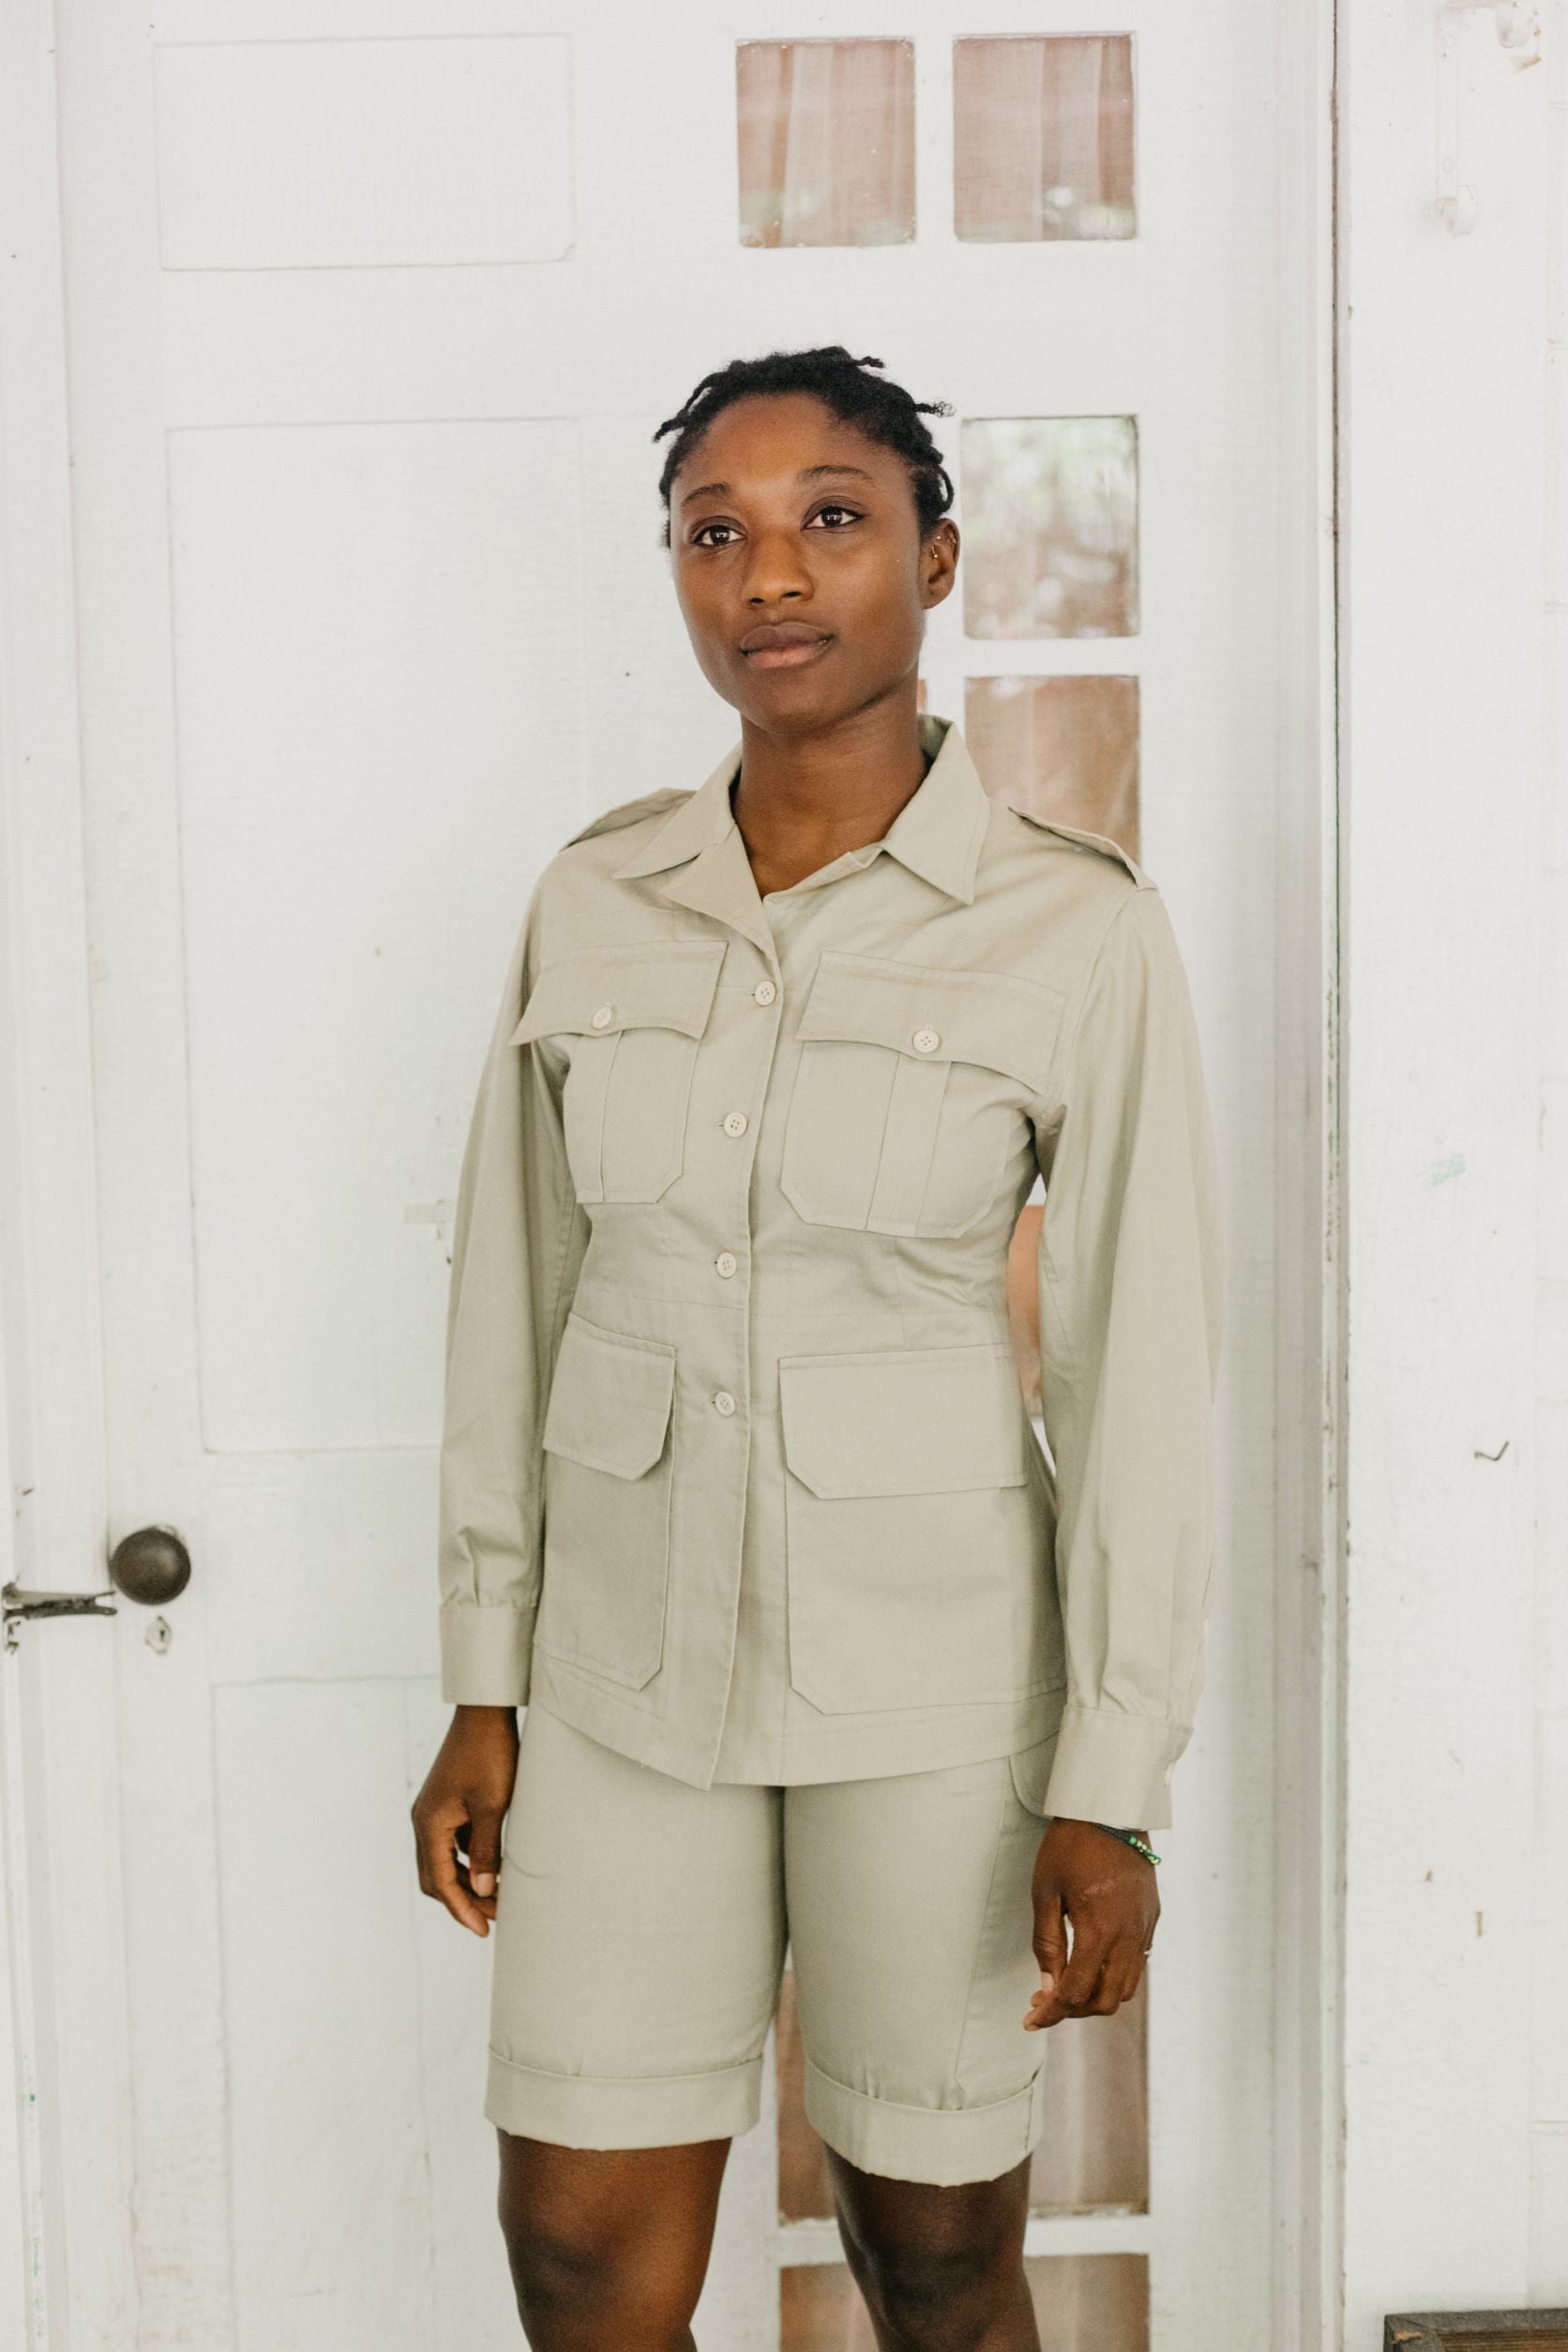 Black woman wearing long sleeve khaki  bush shirt and shorts in front of a white door.